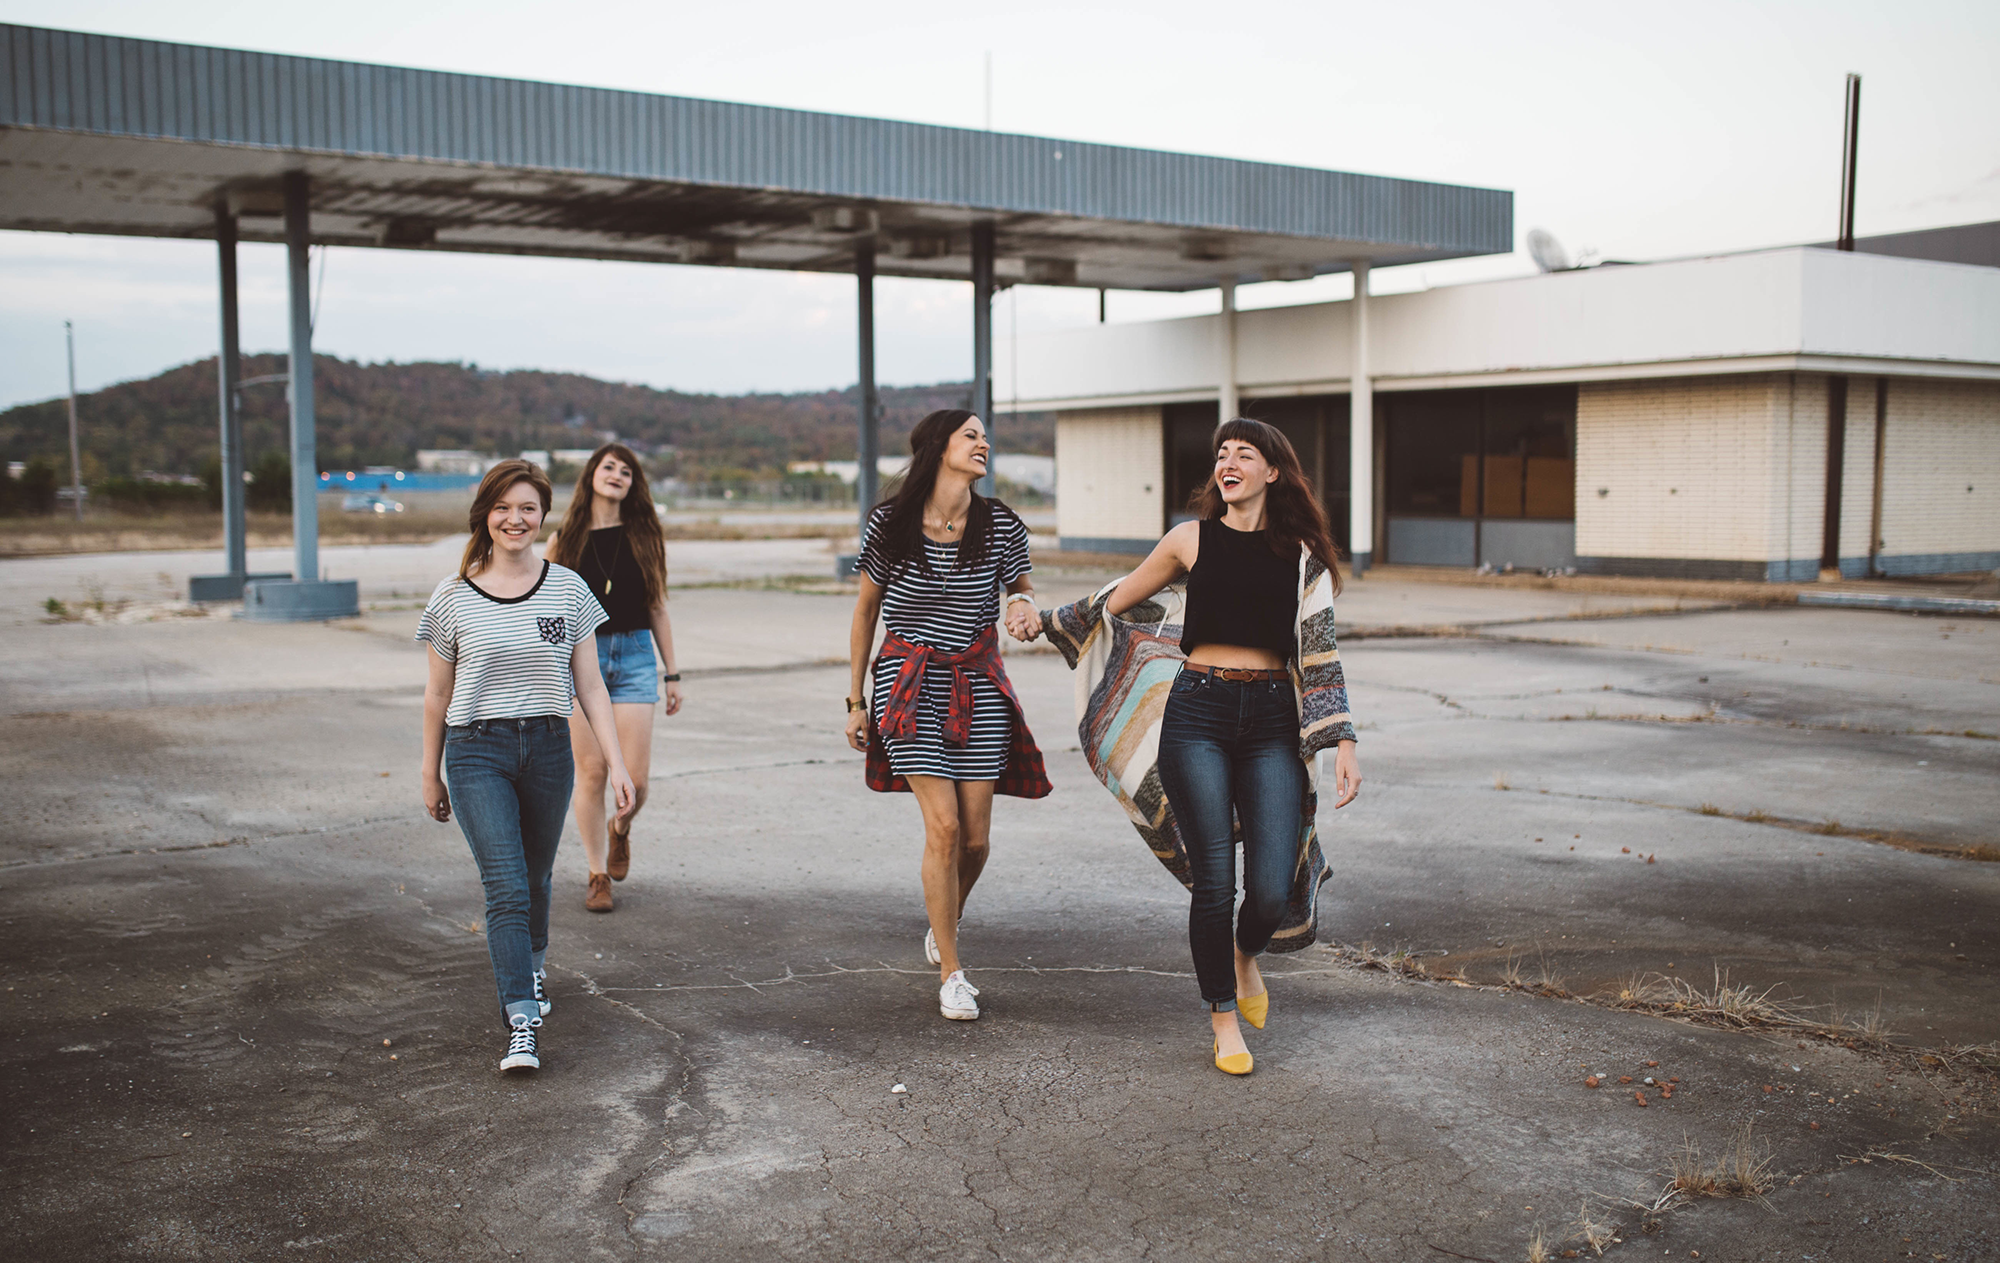 Group of Girls on an Urban Adventure, pictured at an abandoned gas station.